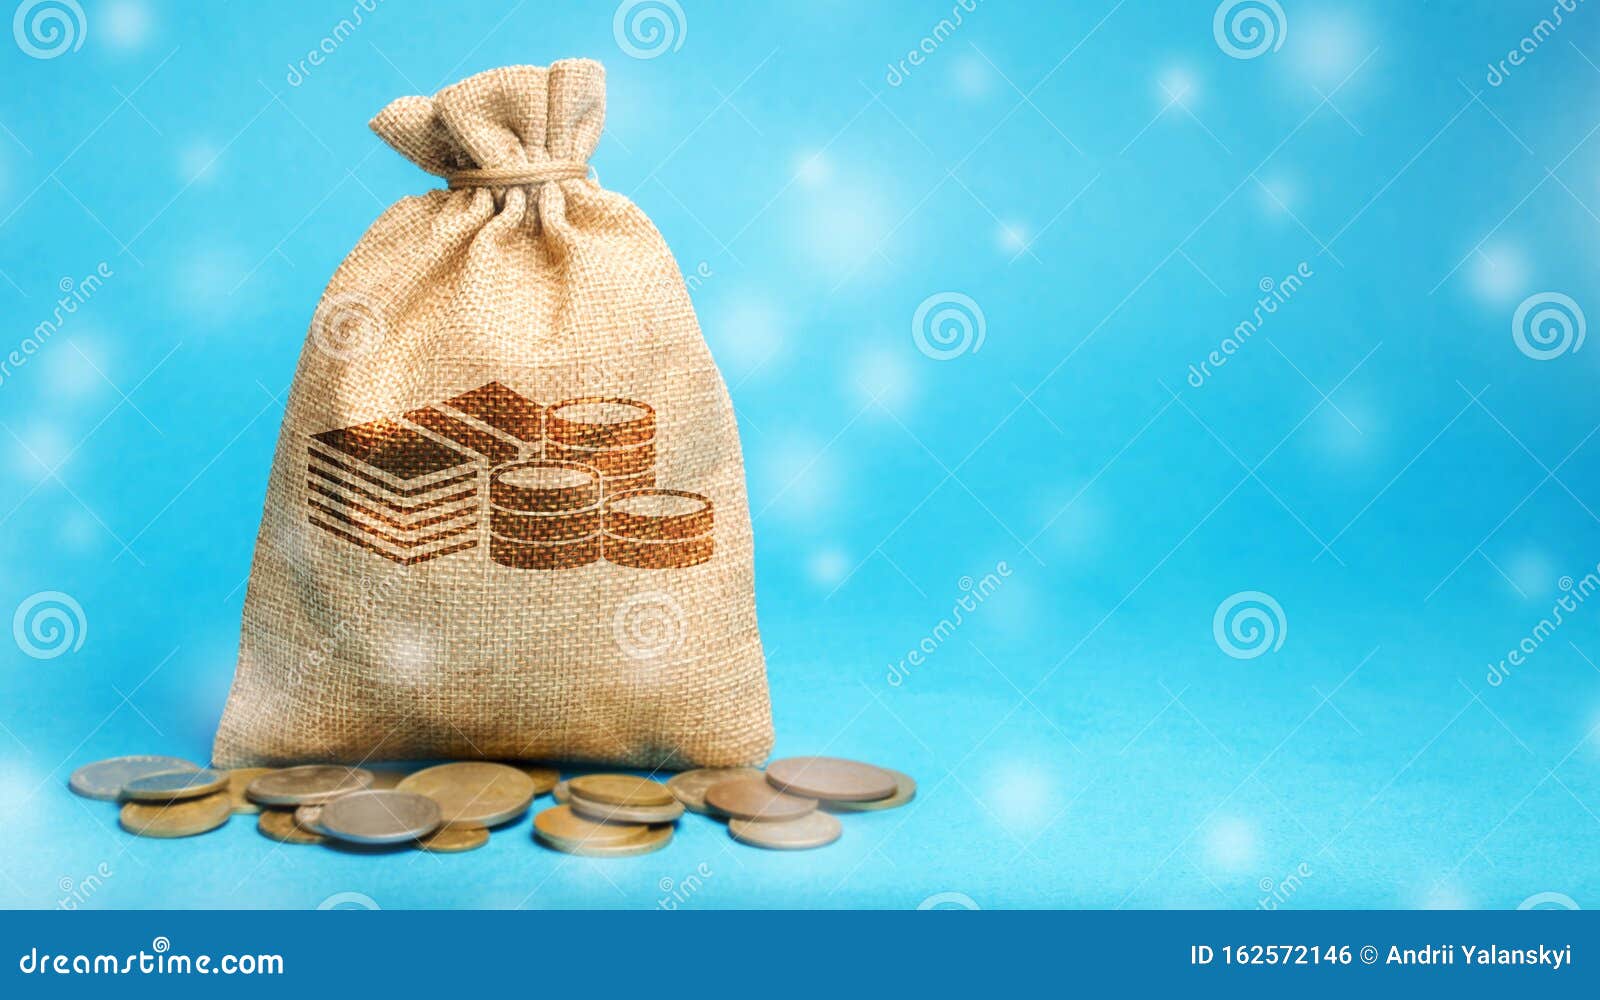 Money Bag With Coins And Snowfall Business And Finance Loans